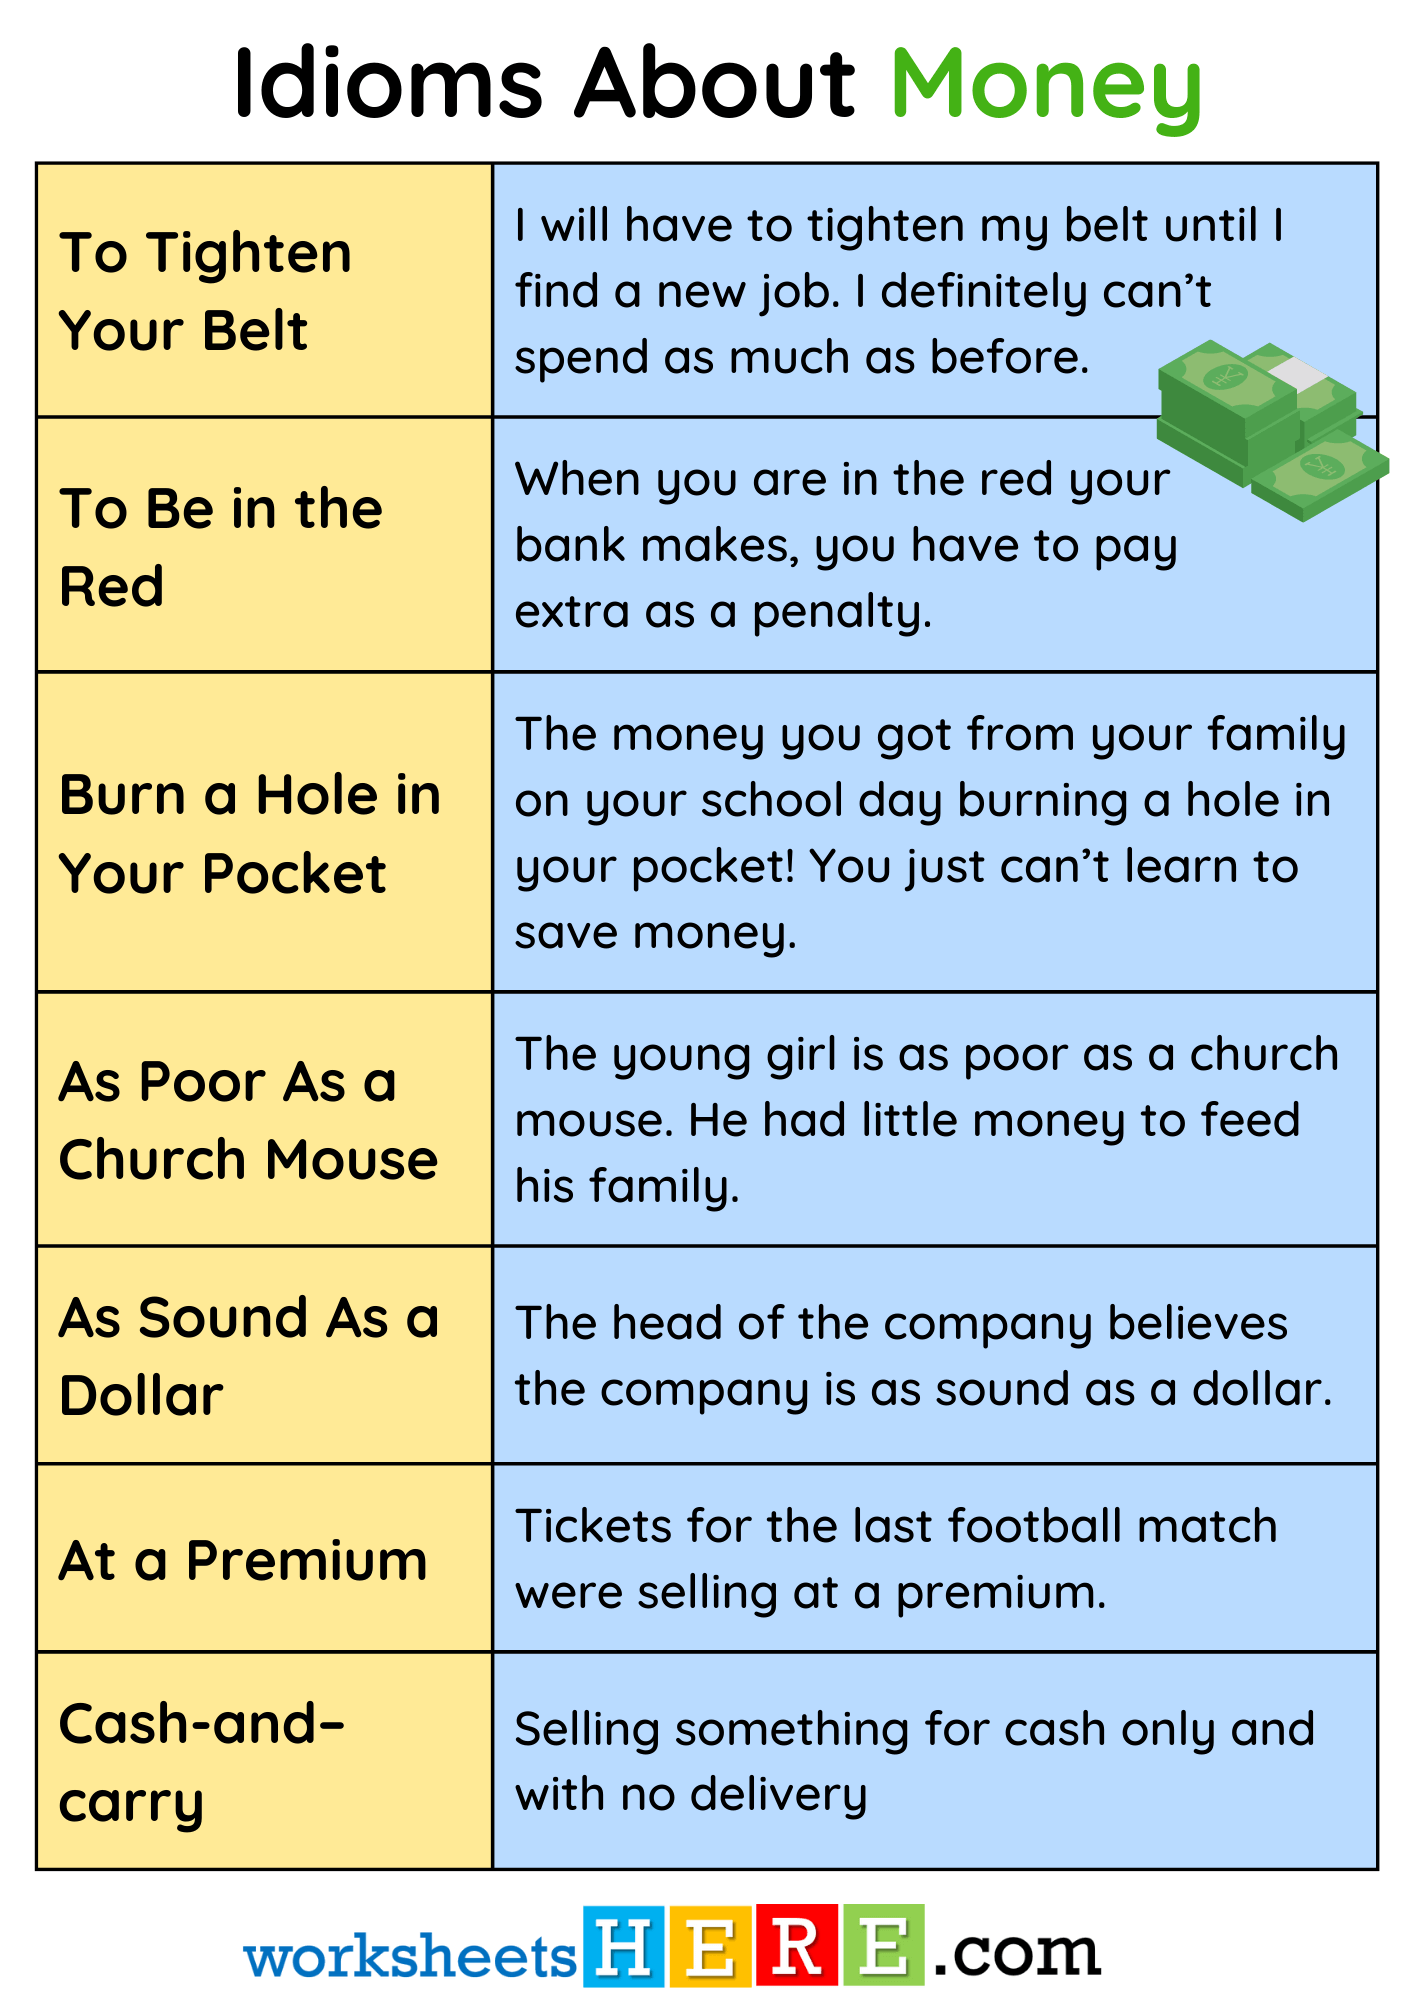 Idioms About Money and Example Sentences PDF Worksheet For Students